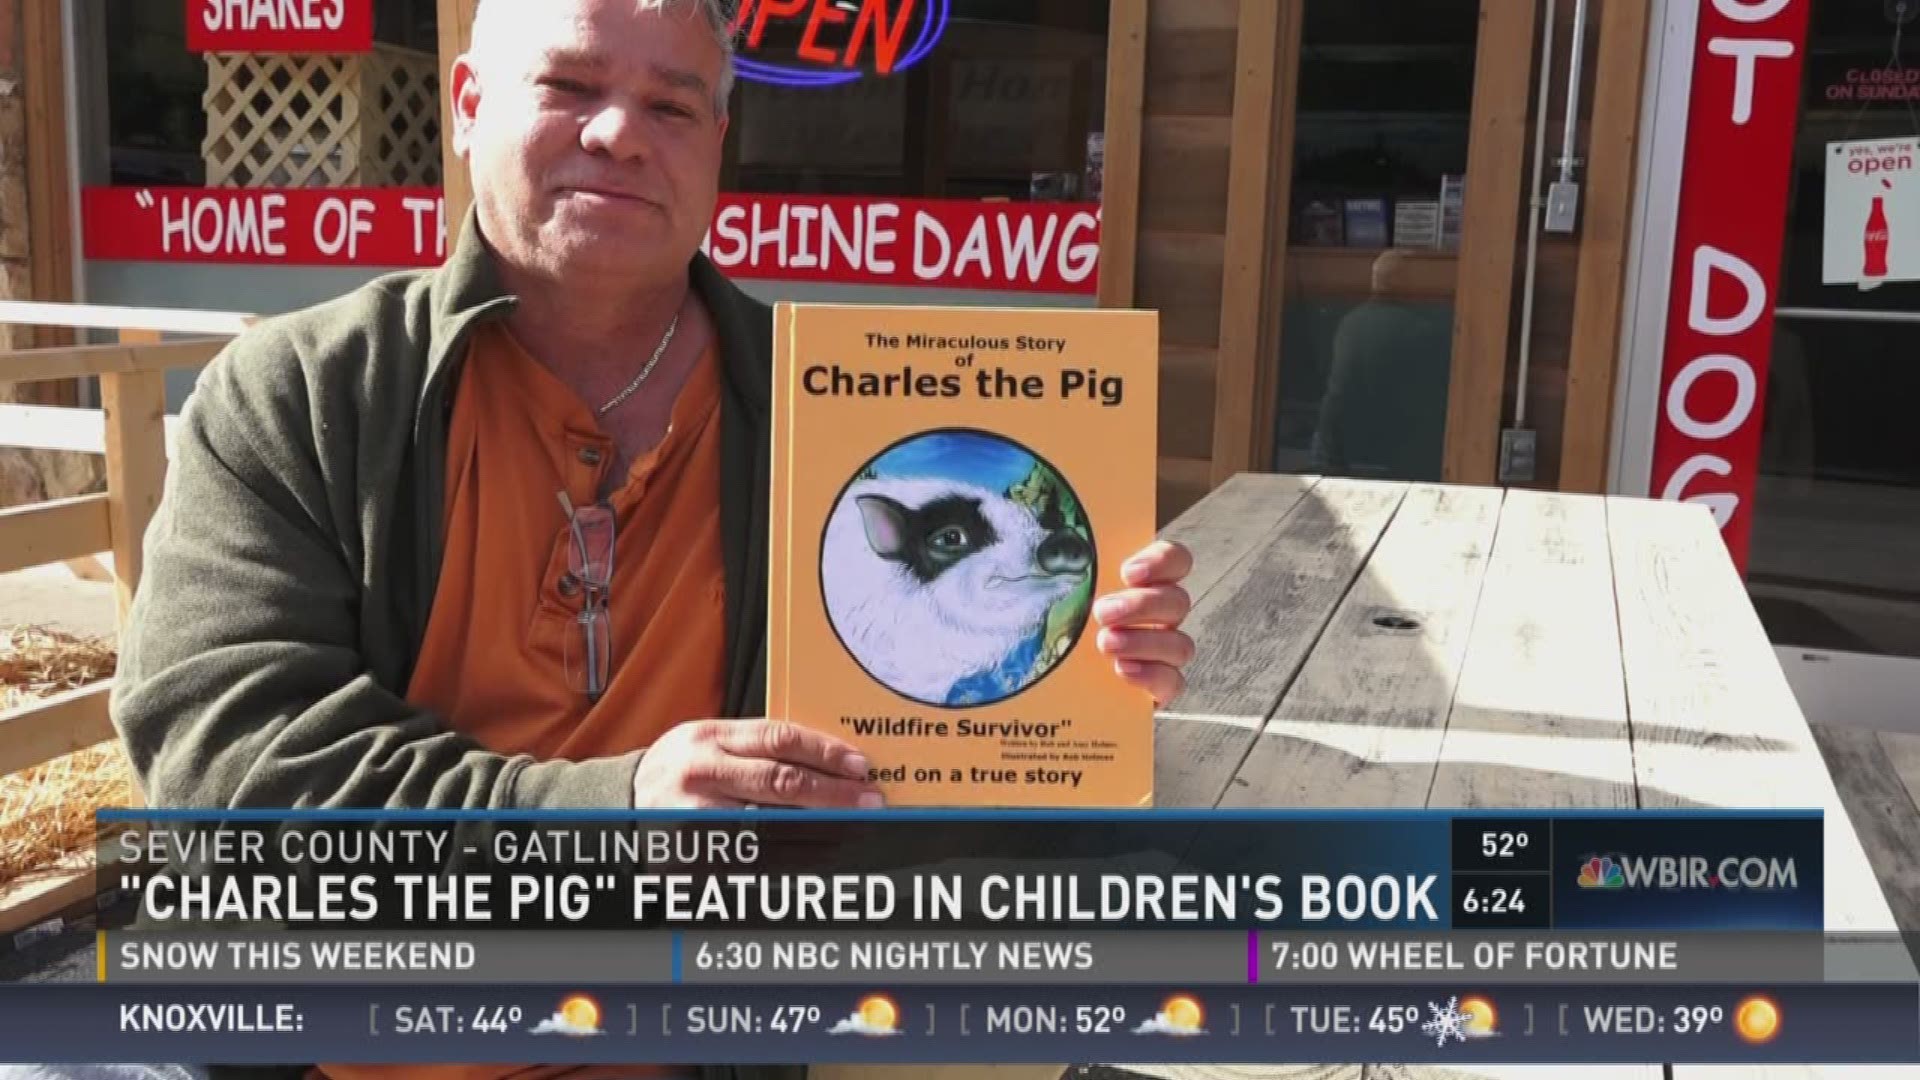 March 10, 2017: Charles the pig survived the Sevier County wildfires by burrowing in the mud. Now, his story of resilience is the subject of a children's book.